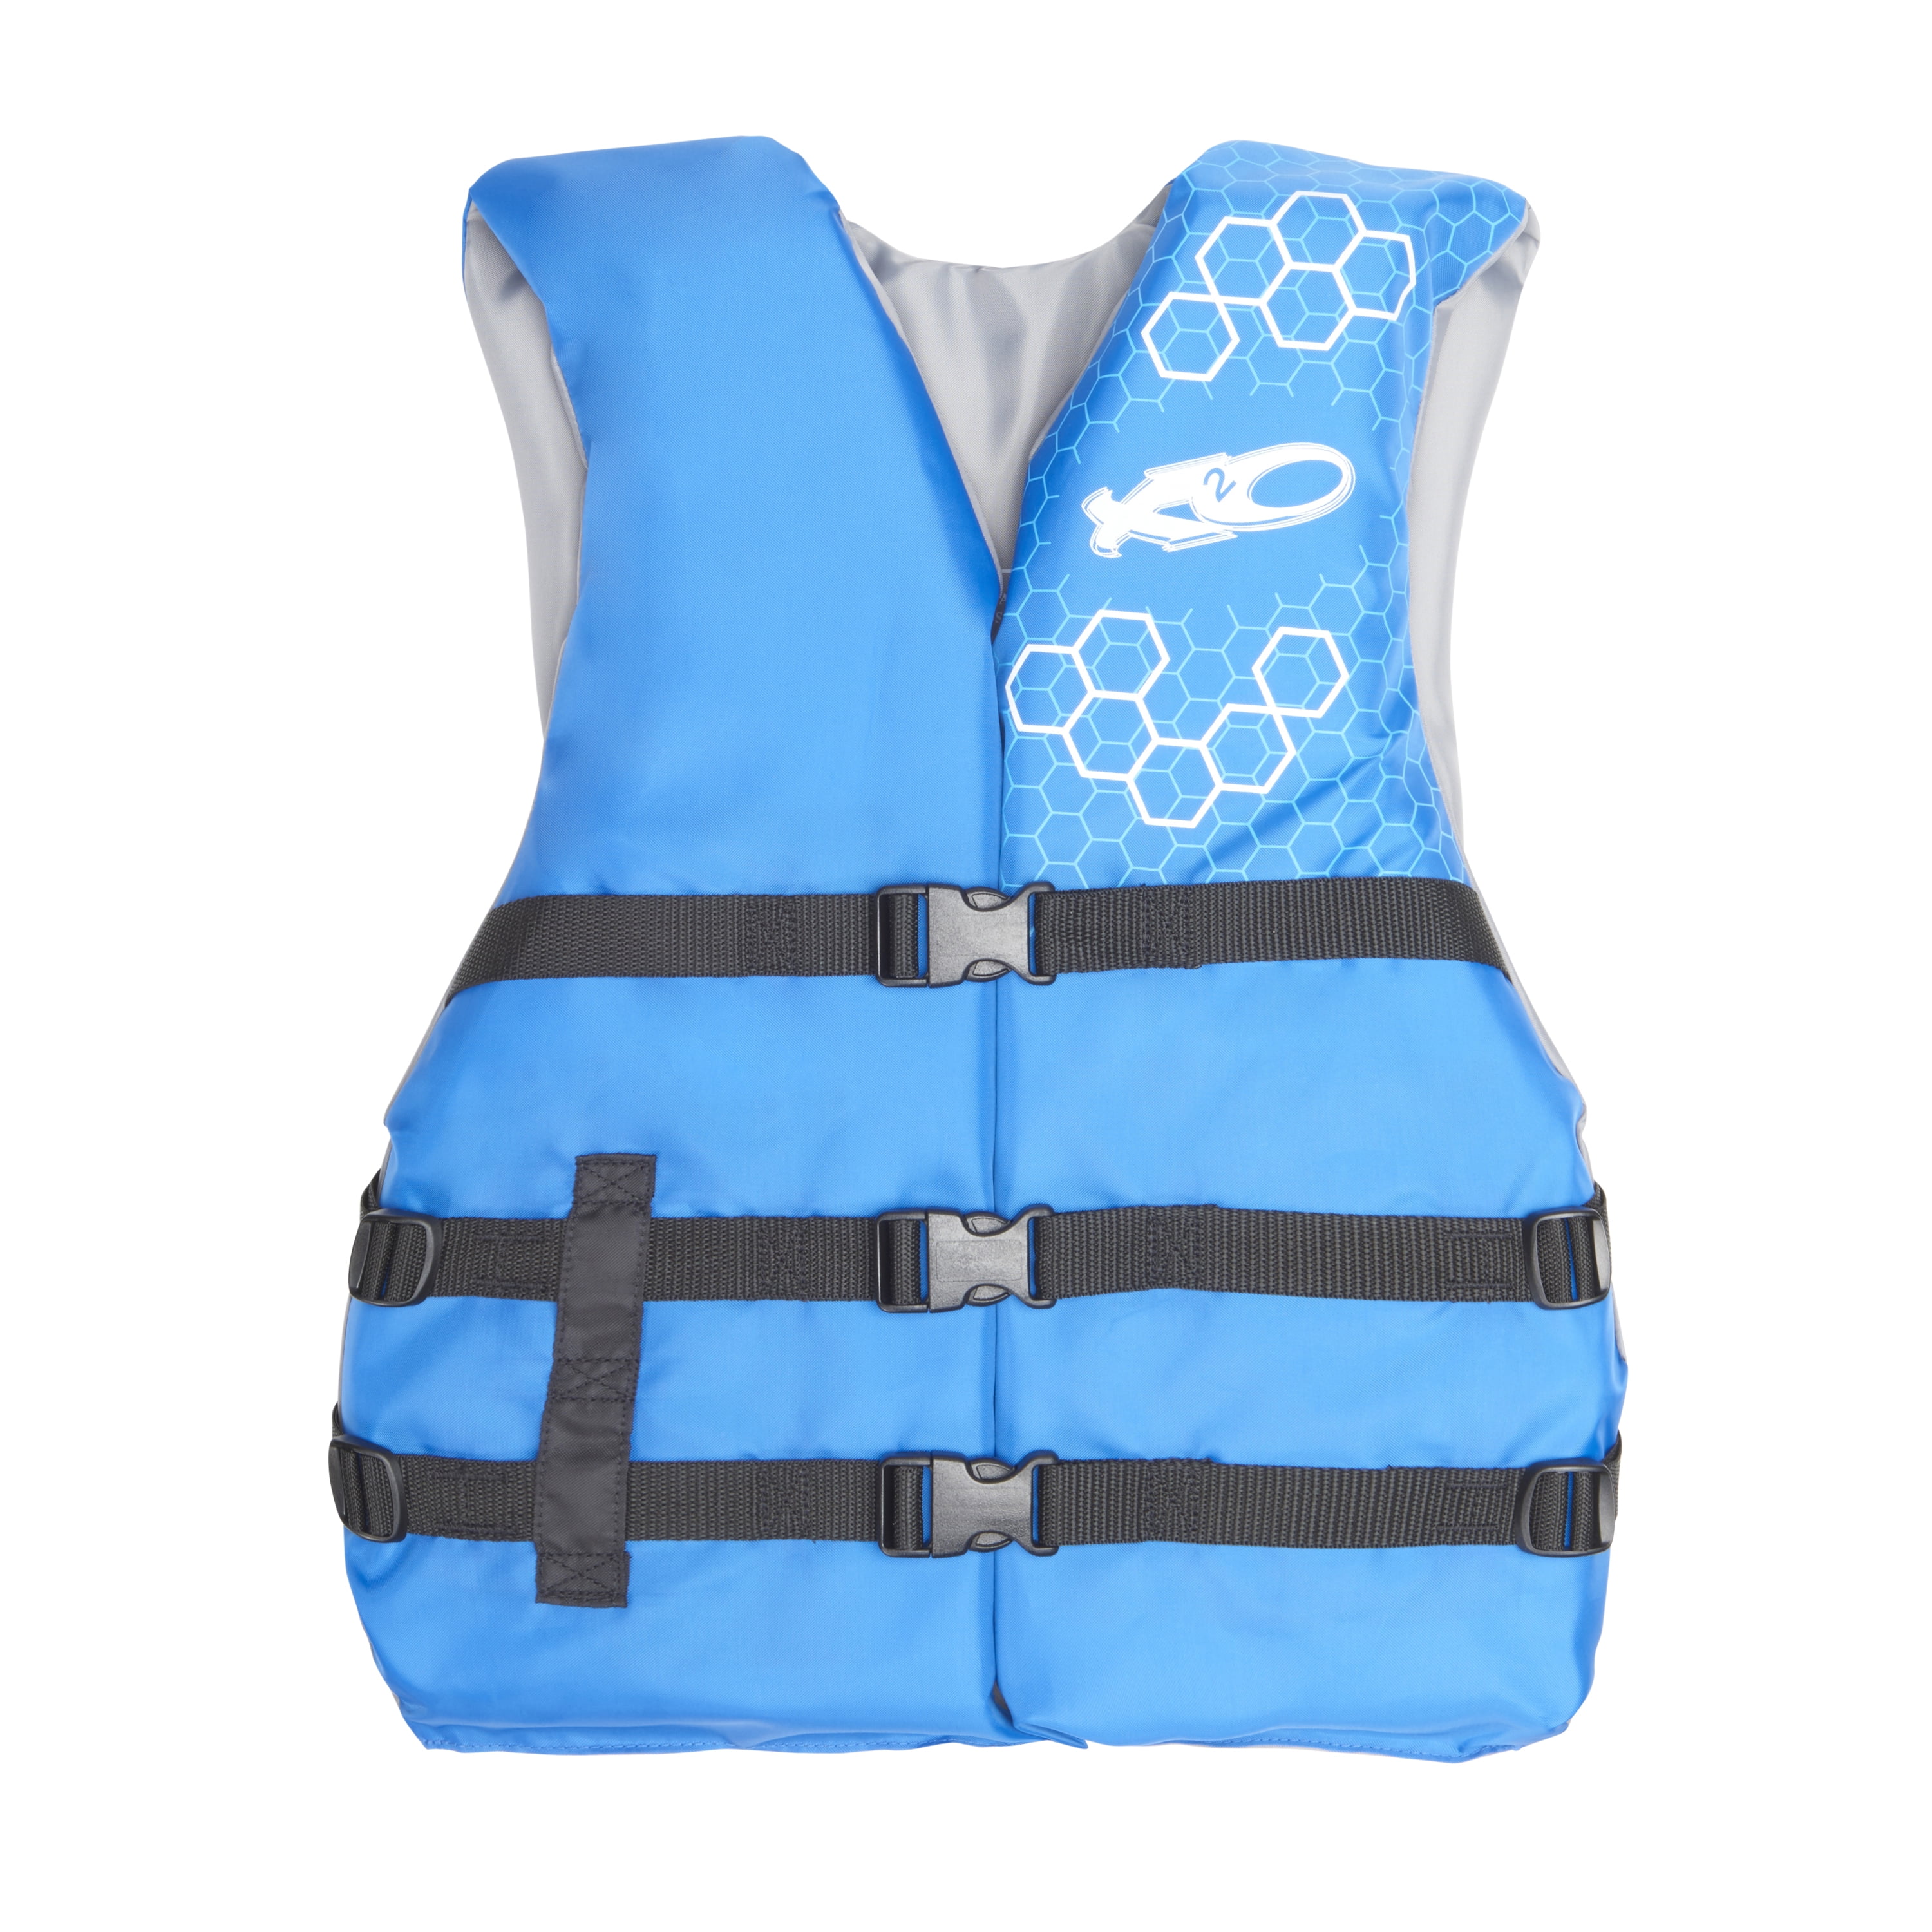 X2O Universal Life Jacket and Vest for Adults, Blue – Walmart Inventory ...